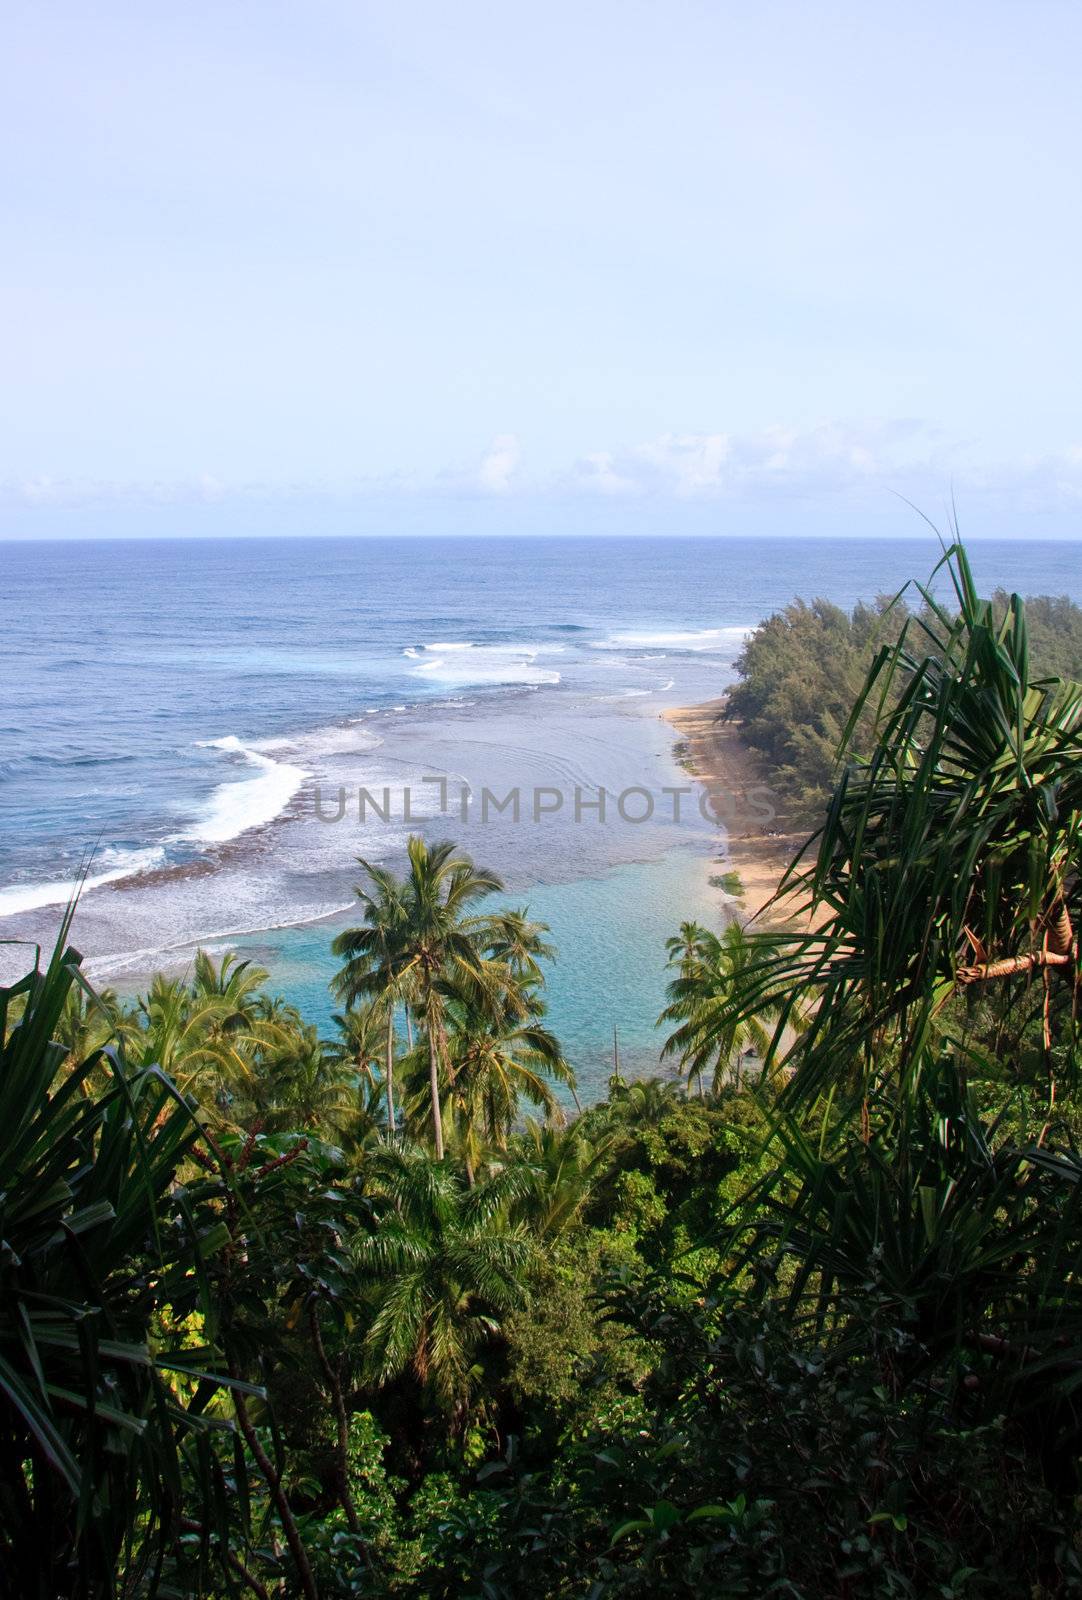 Ke'e beach surrounded by green trees, ferns and palm trees